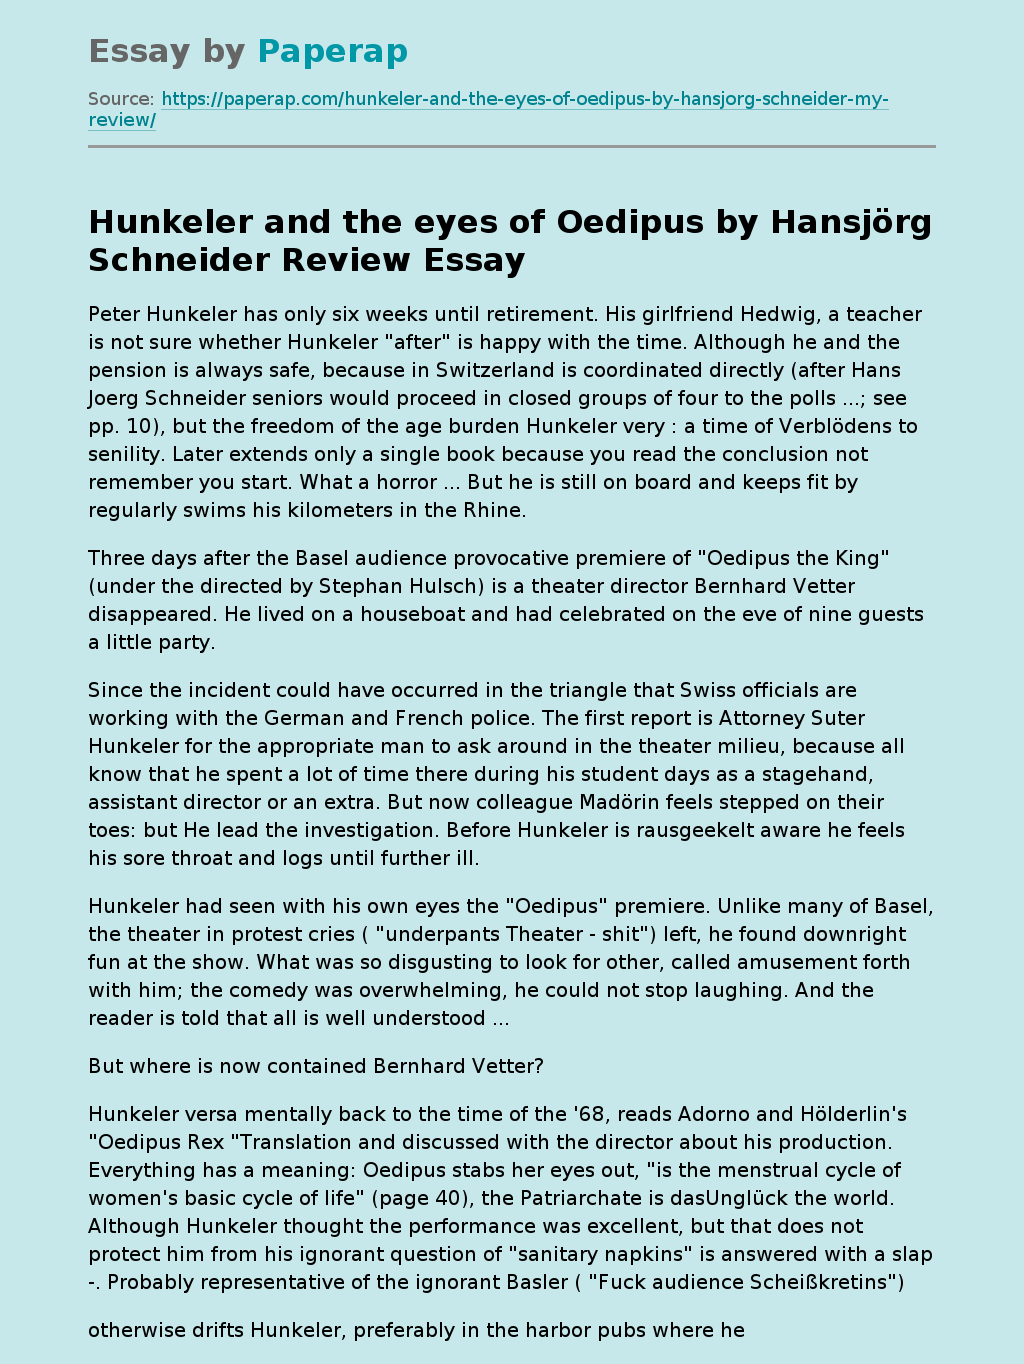 Hunkeler and the Eyes of Oedipus by Hansjörg Schneider Review